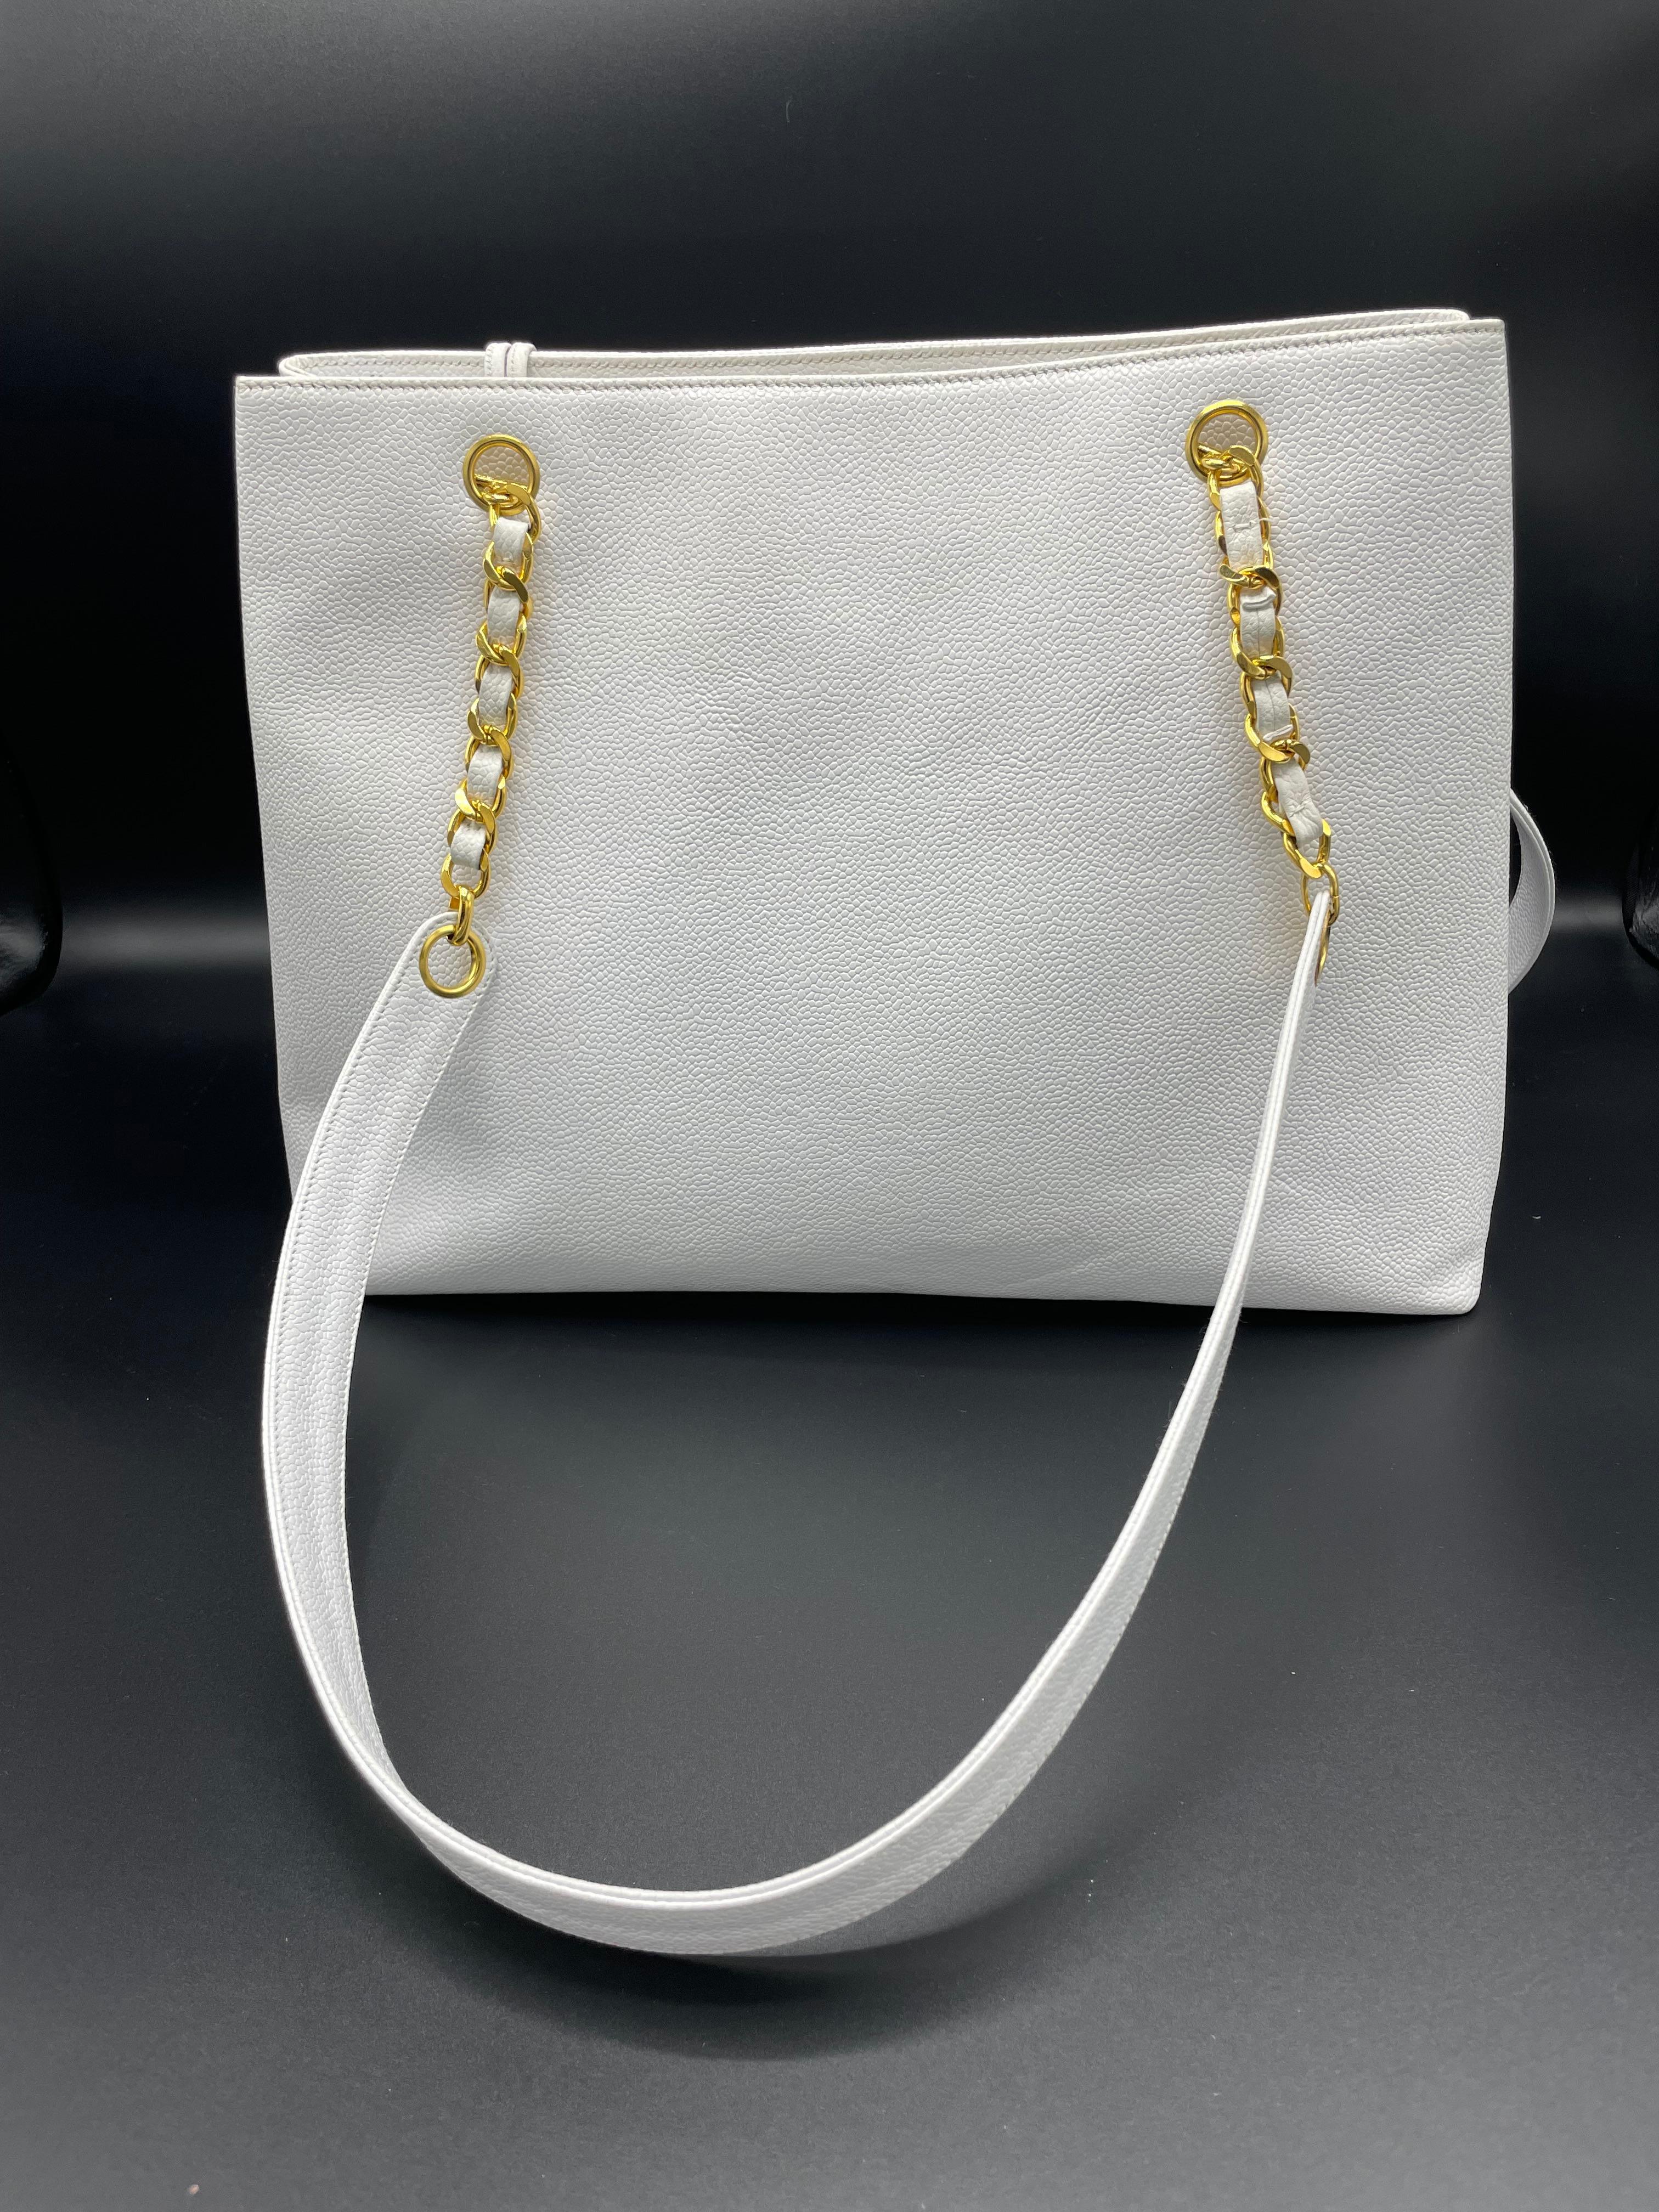 Chanel White Caviar Leather Front Pocket Tote Bag For Sale 4